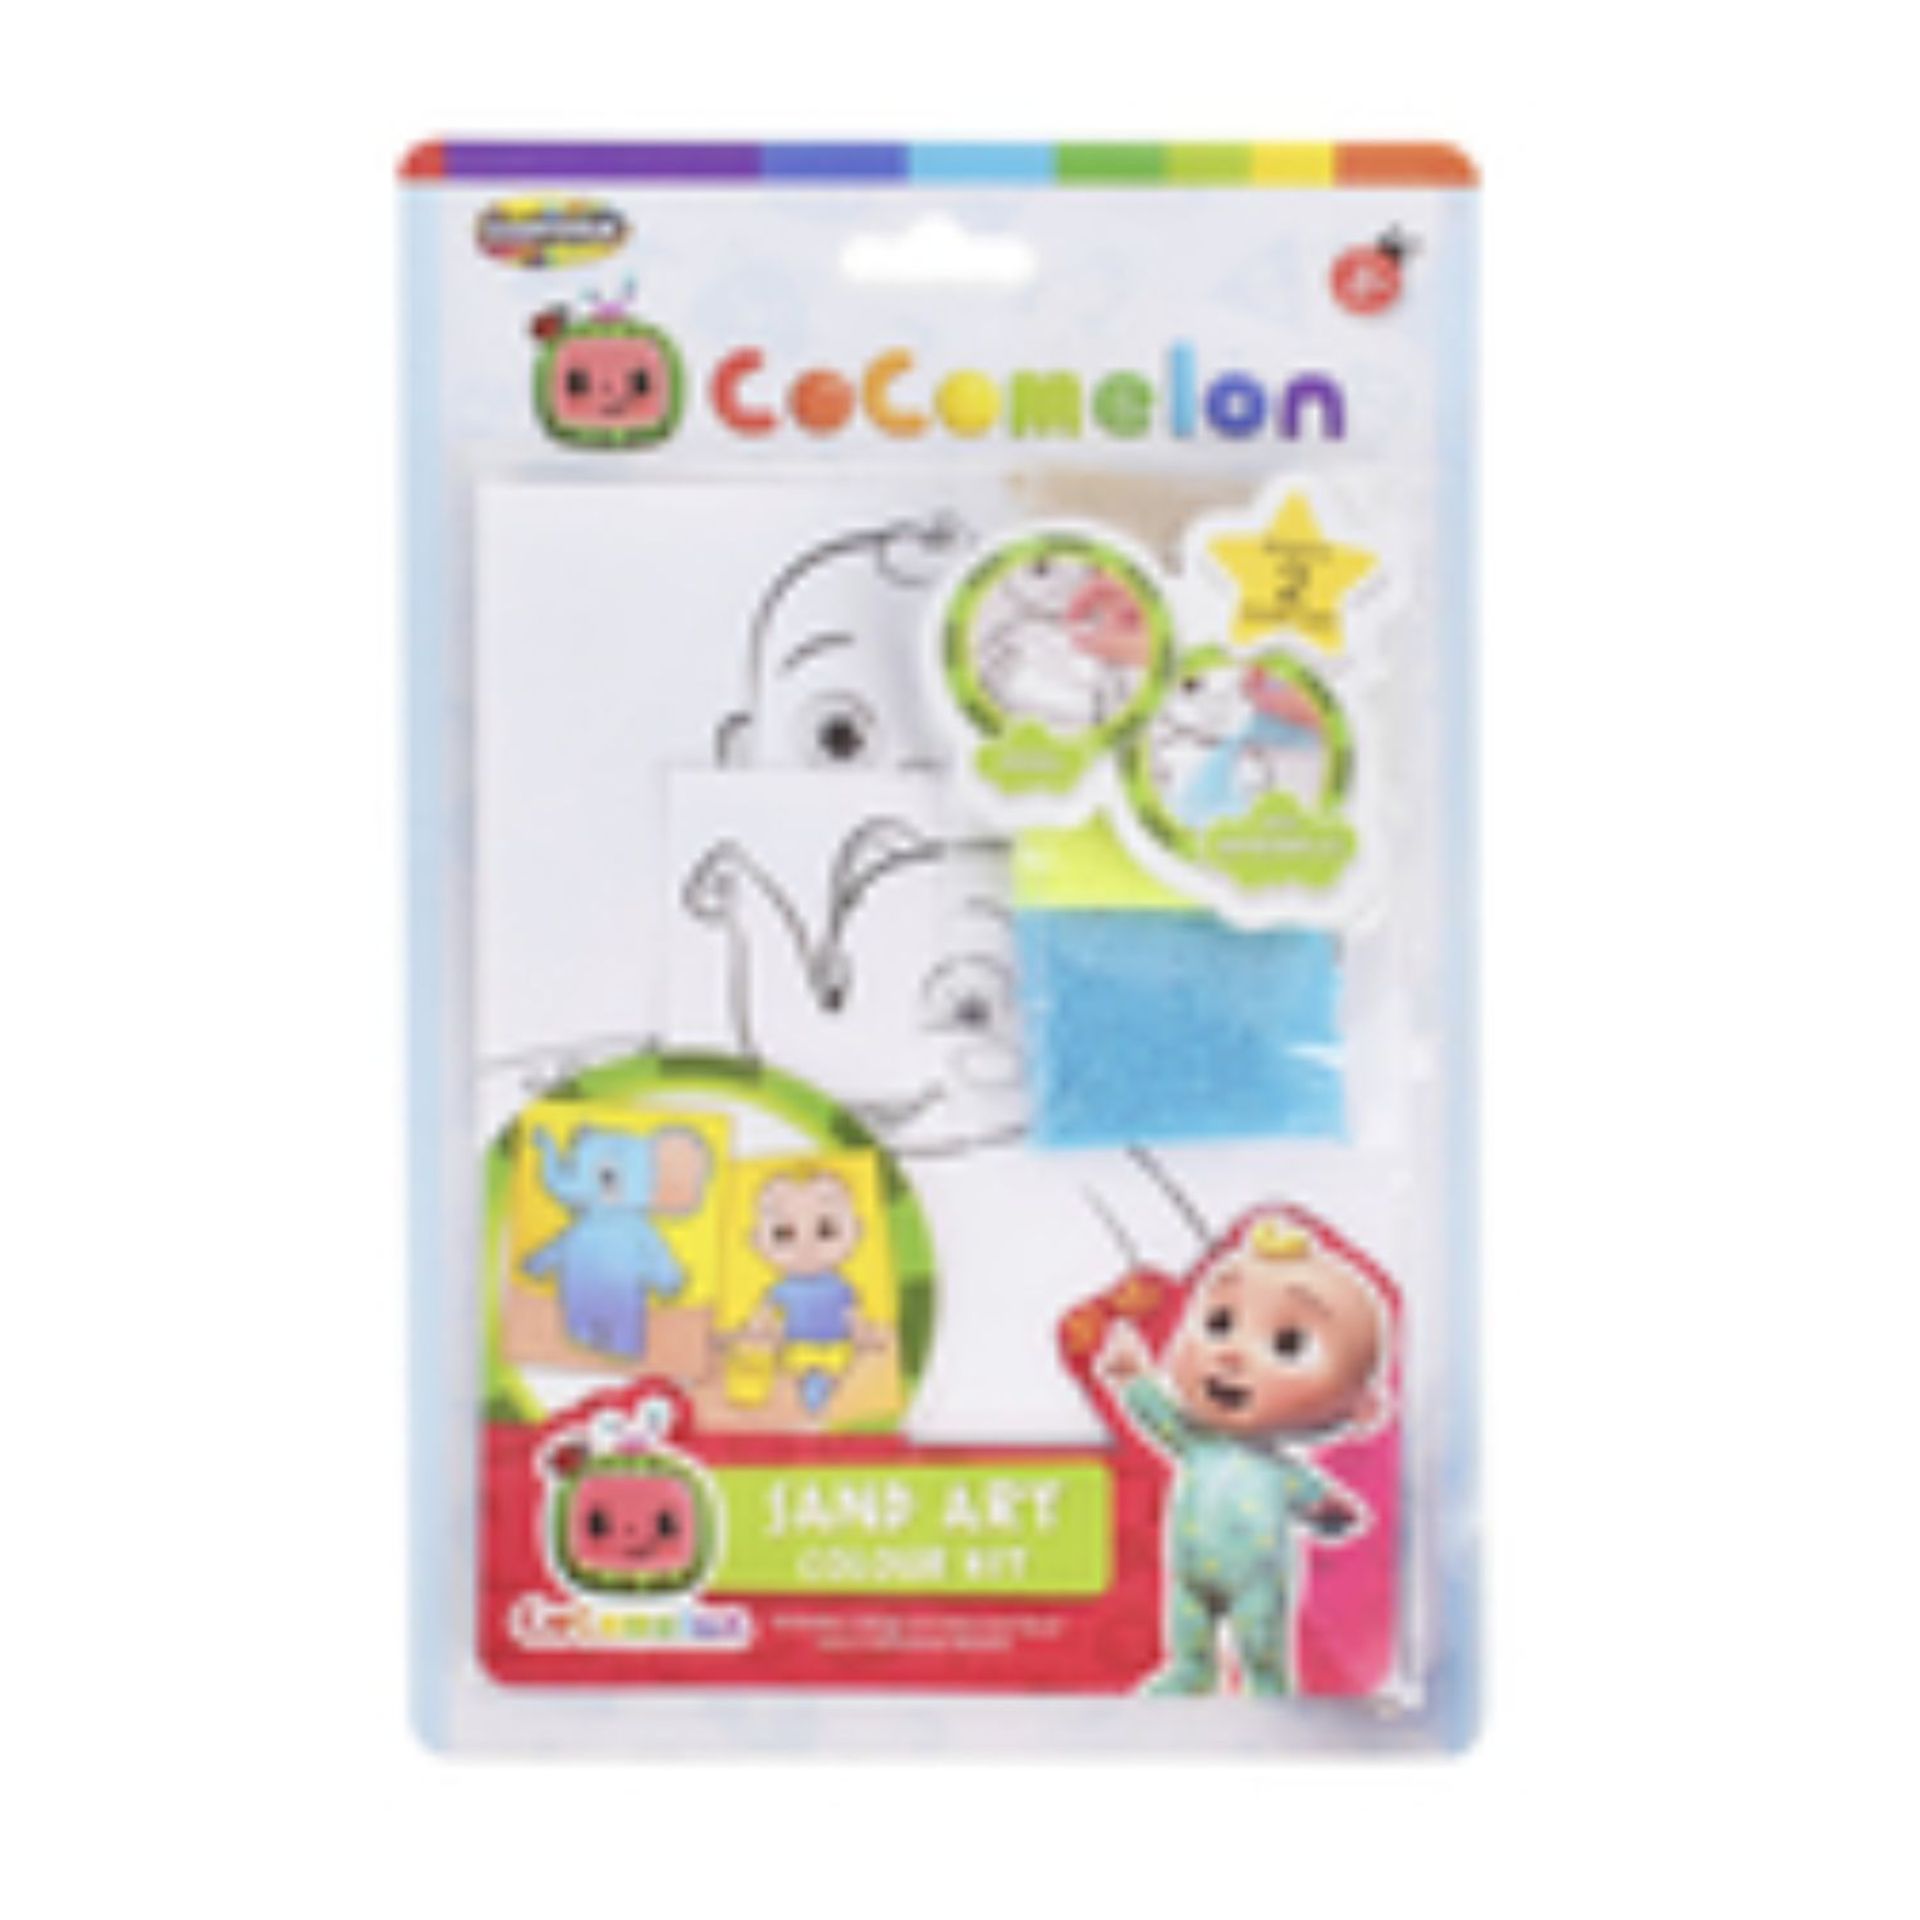 1000 PACKS OF COCOMELON ACTIVITY SETS, SANDPAPER SET AND PAINT SET - Image 2 of 3